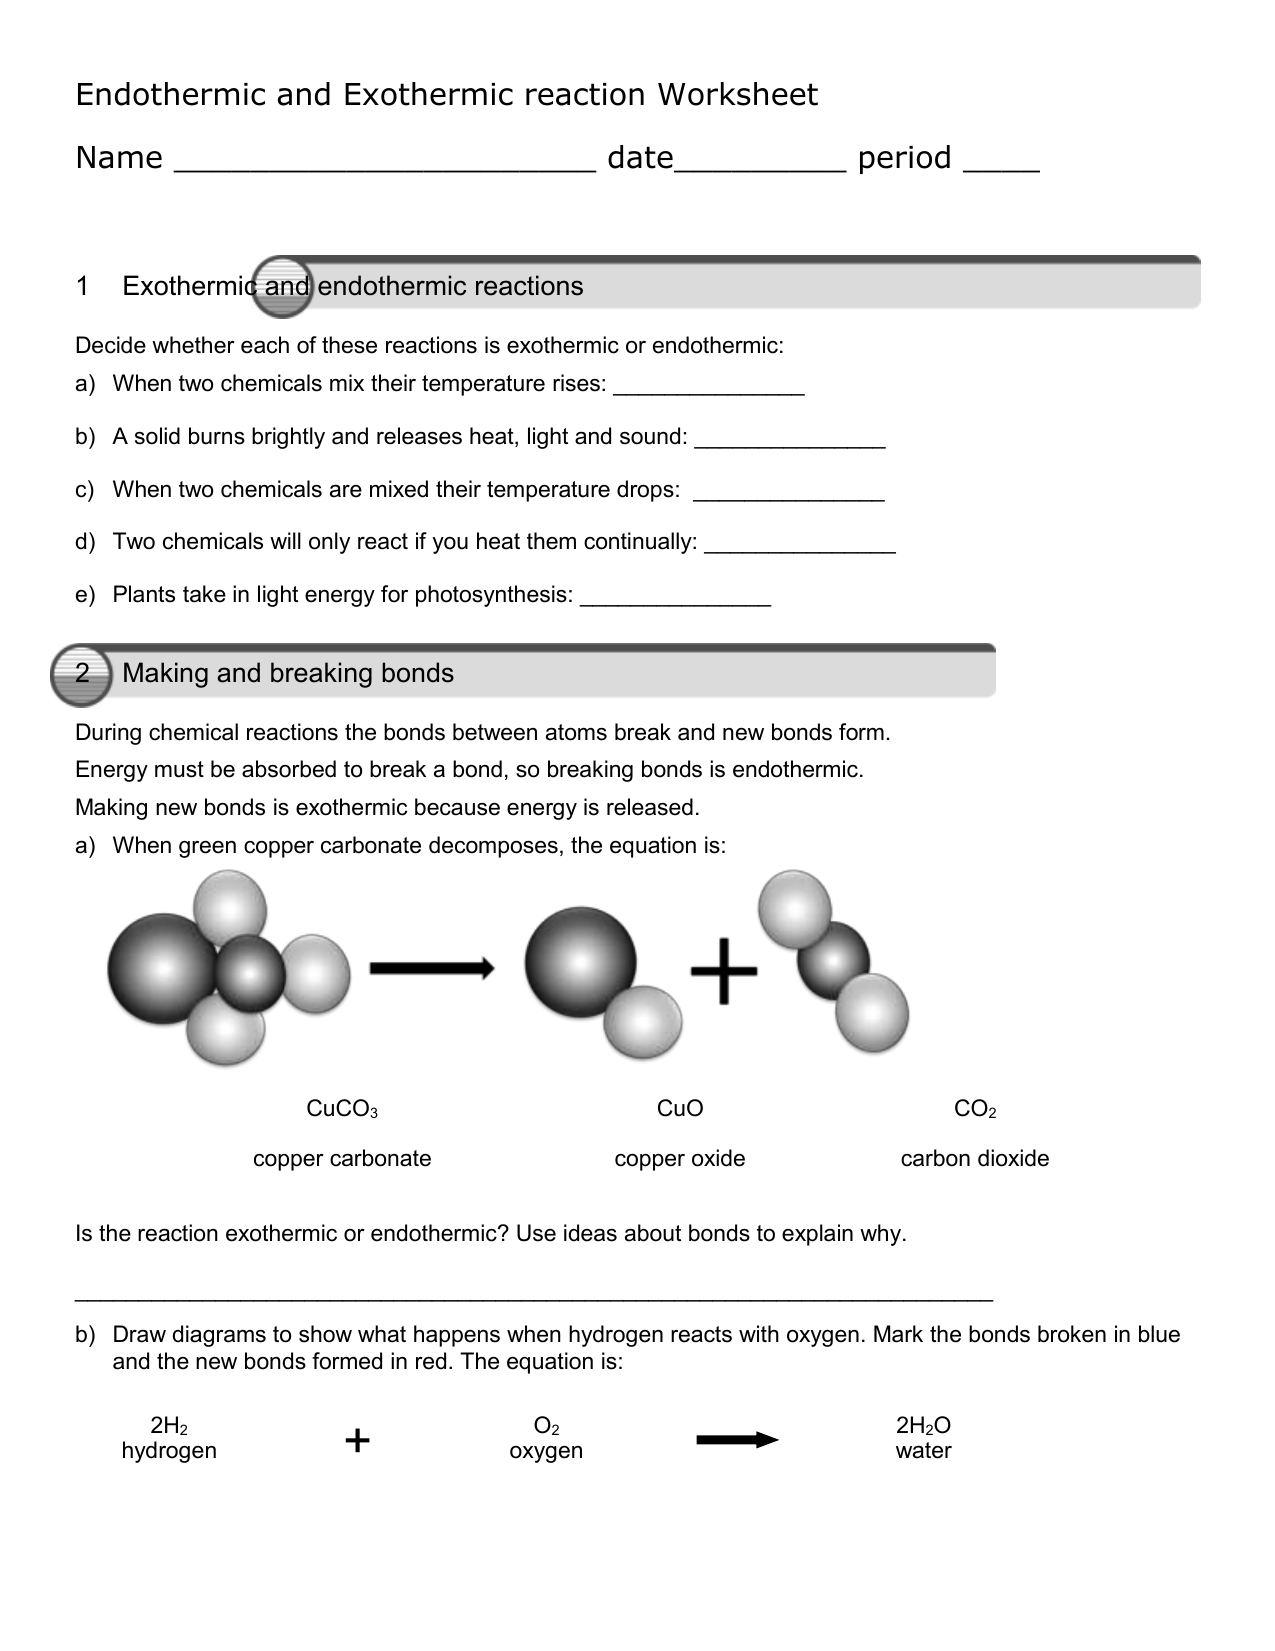 Exothermic And Endothermic Chemical Reactions For Endothermic And Exothermic Reaction Worksheet Answers